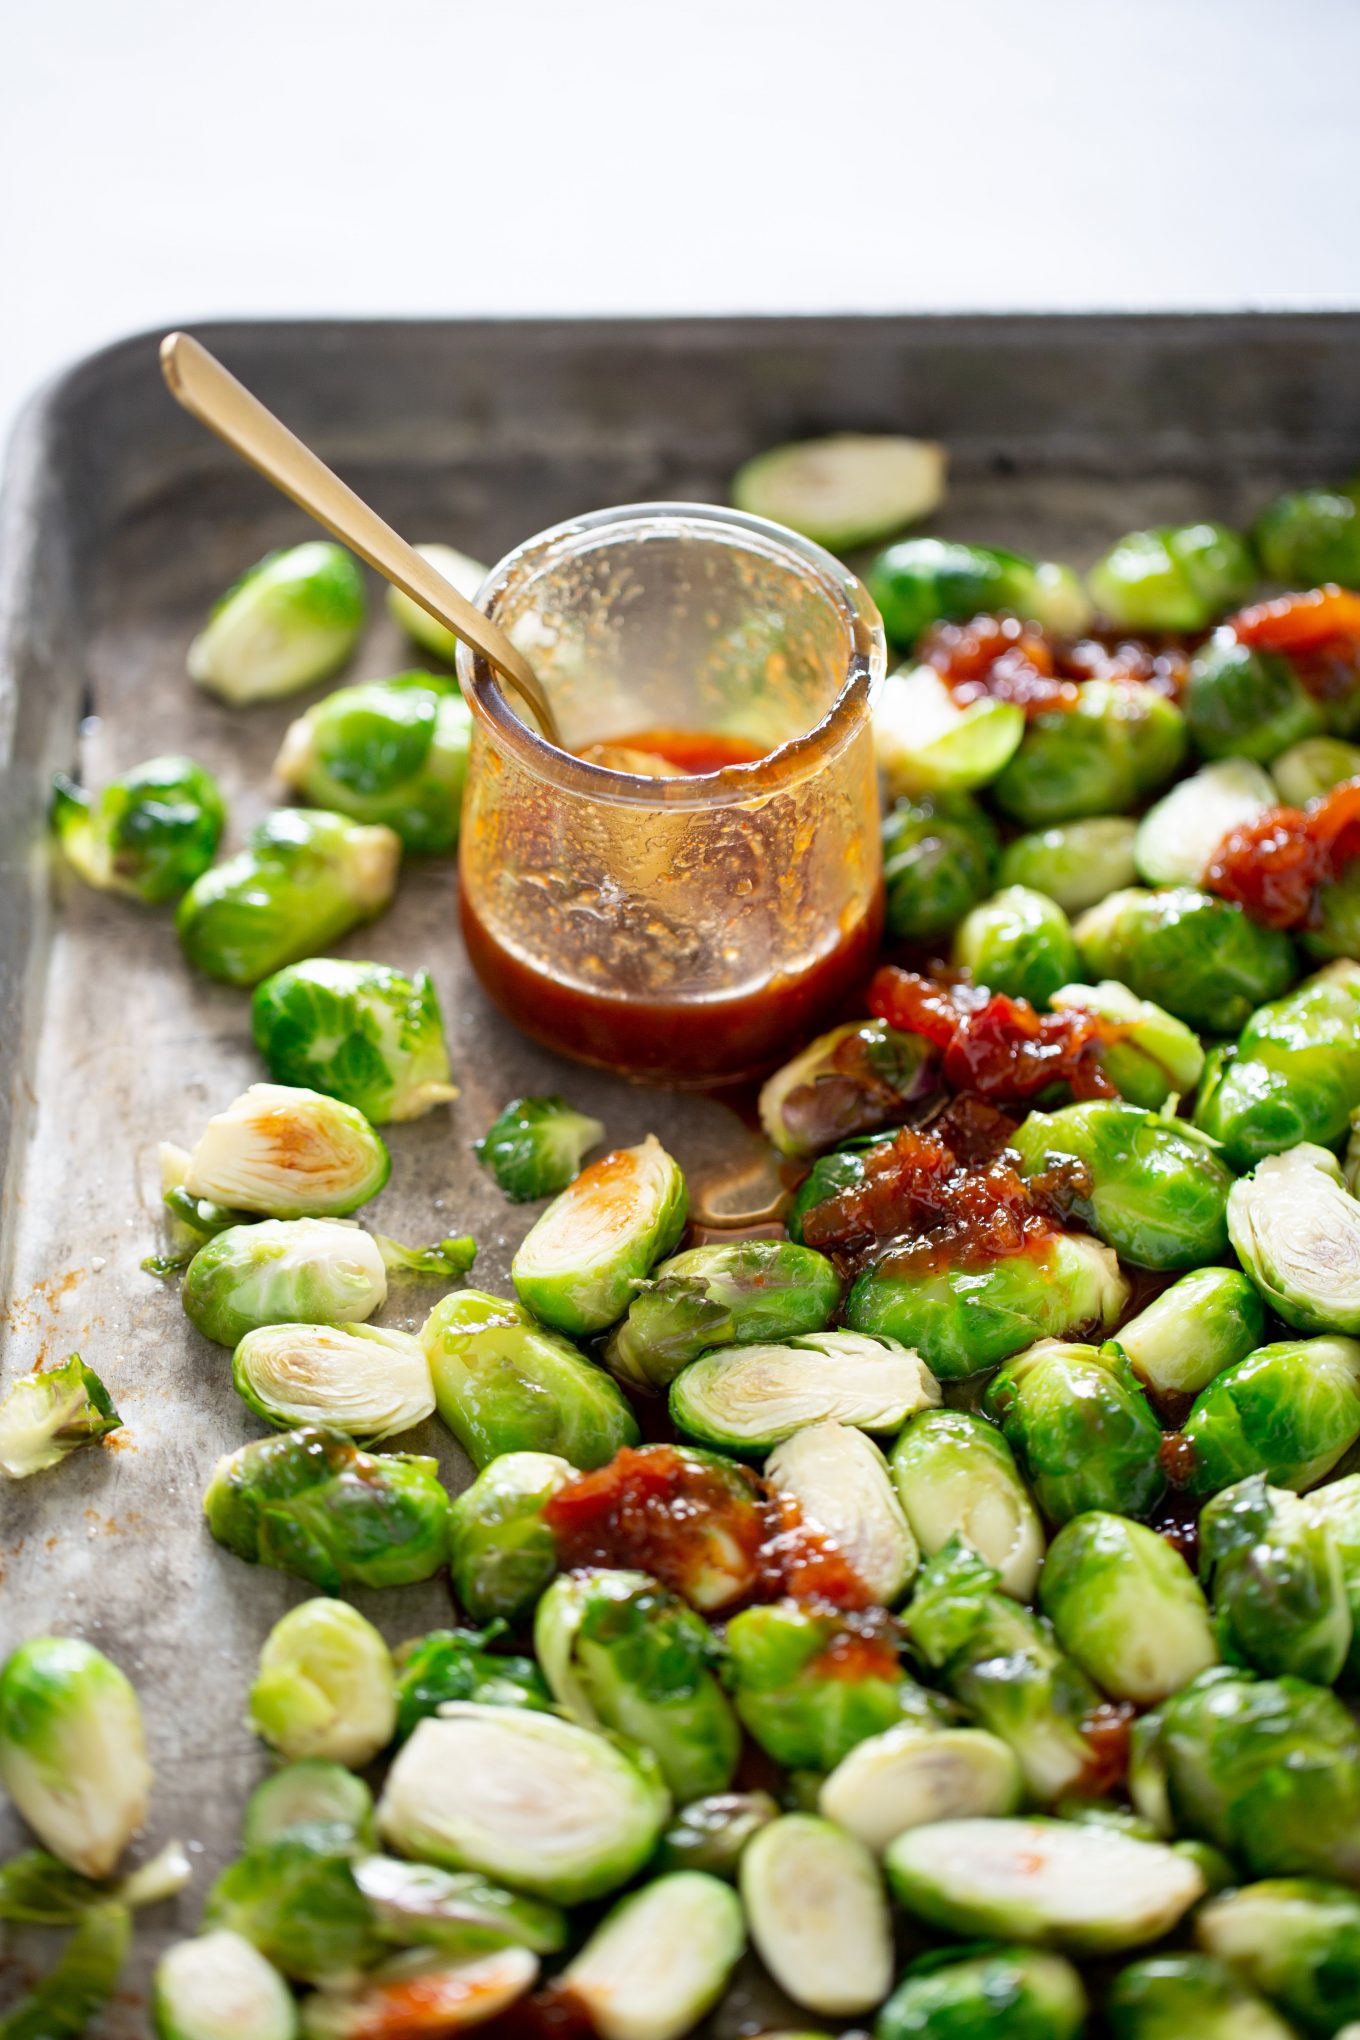 Brussel sprouts on a baking sheet with a jar of sweet ans spicy sauce